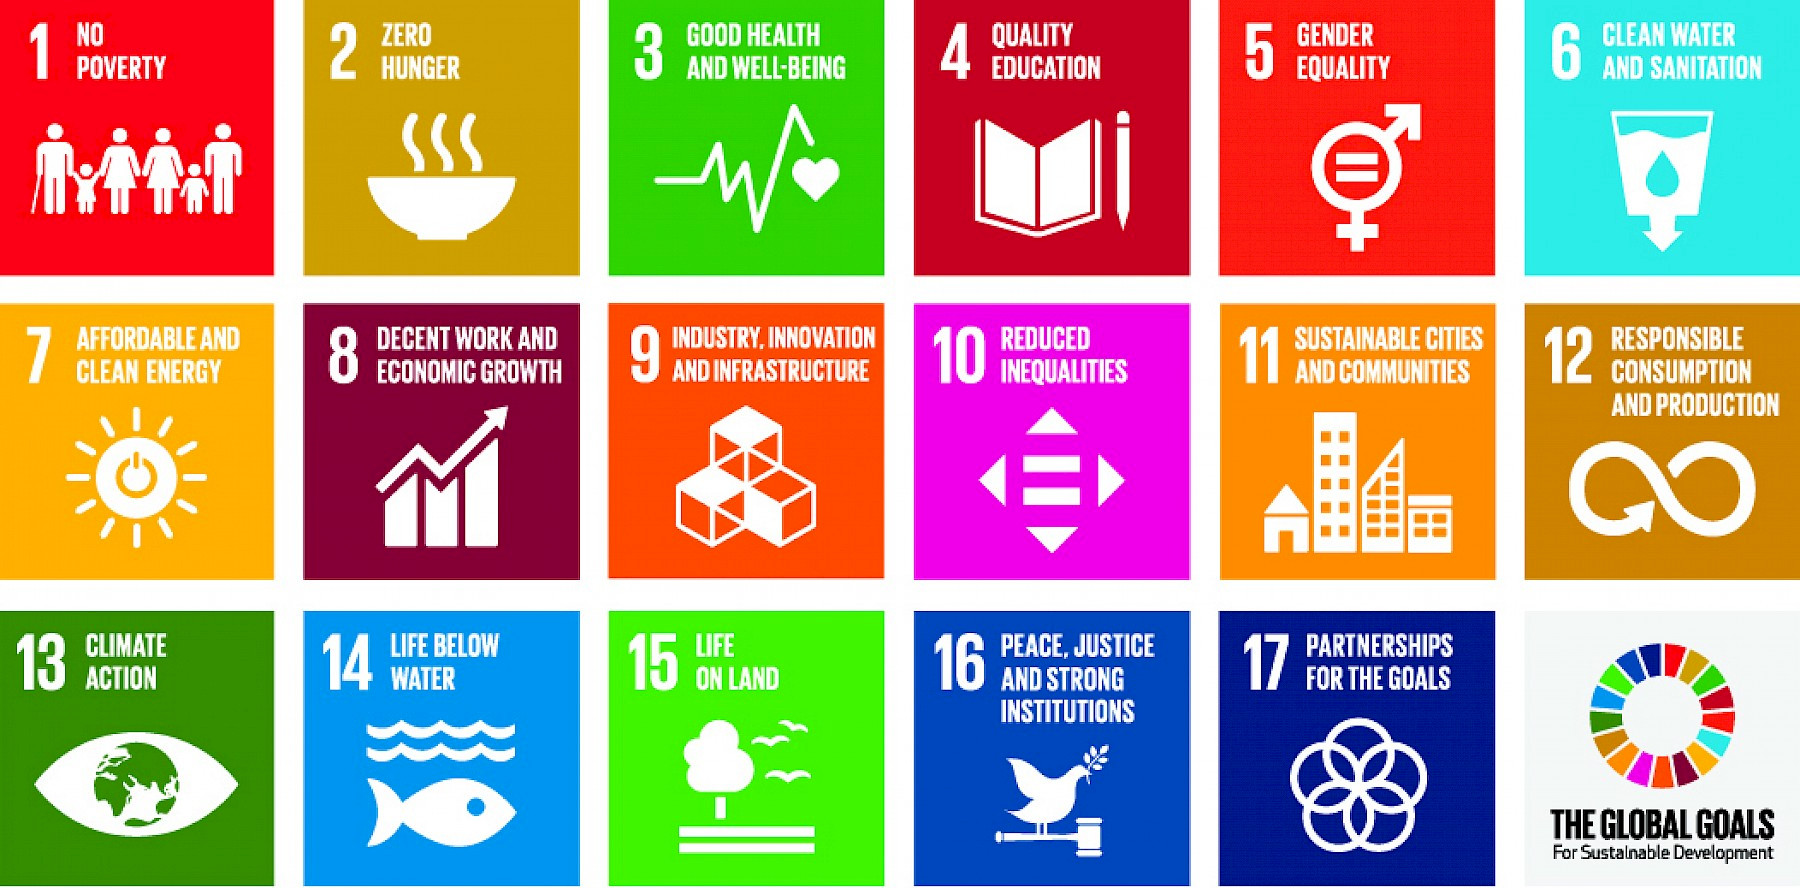 Agenda 2030: The UN's Sustainable Development Goals are the world's joint work plan to eradicate poverty, fight inequality and stop climate change by 2030.